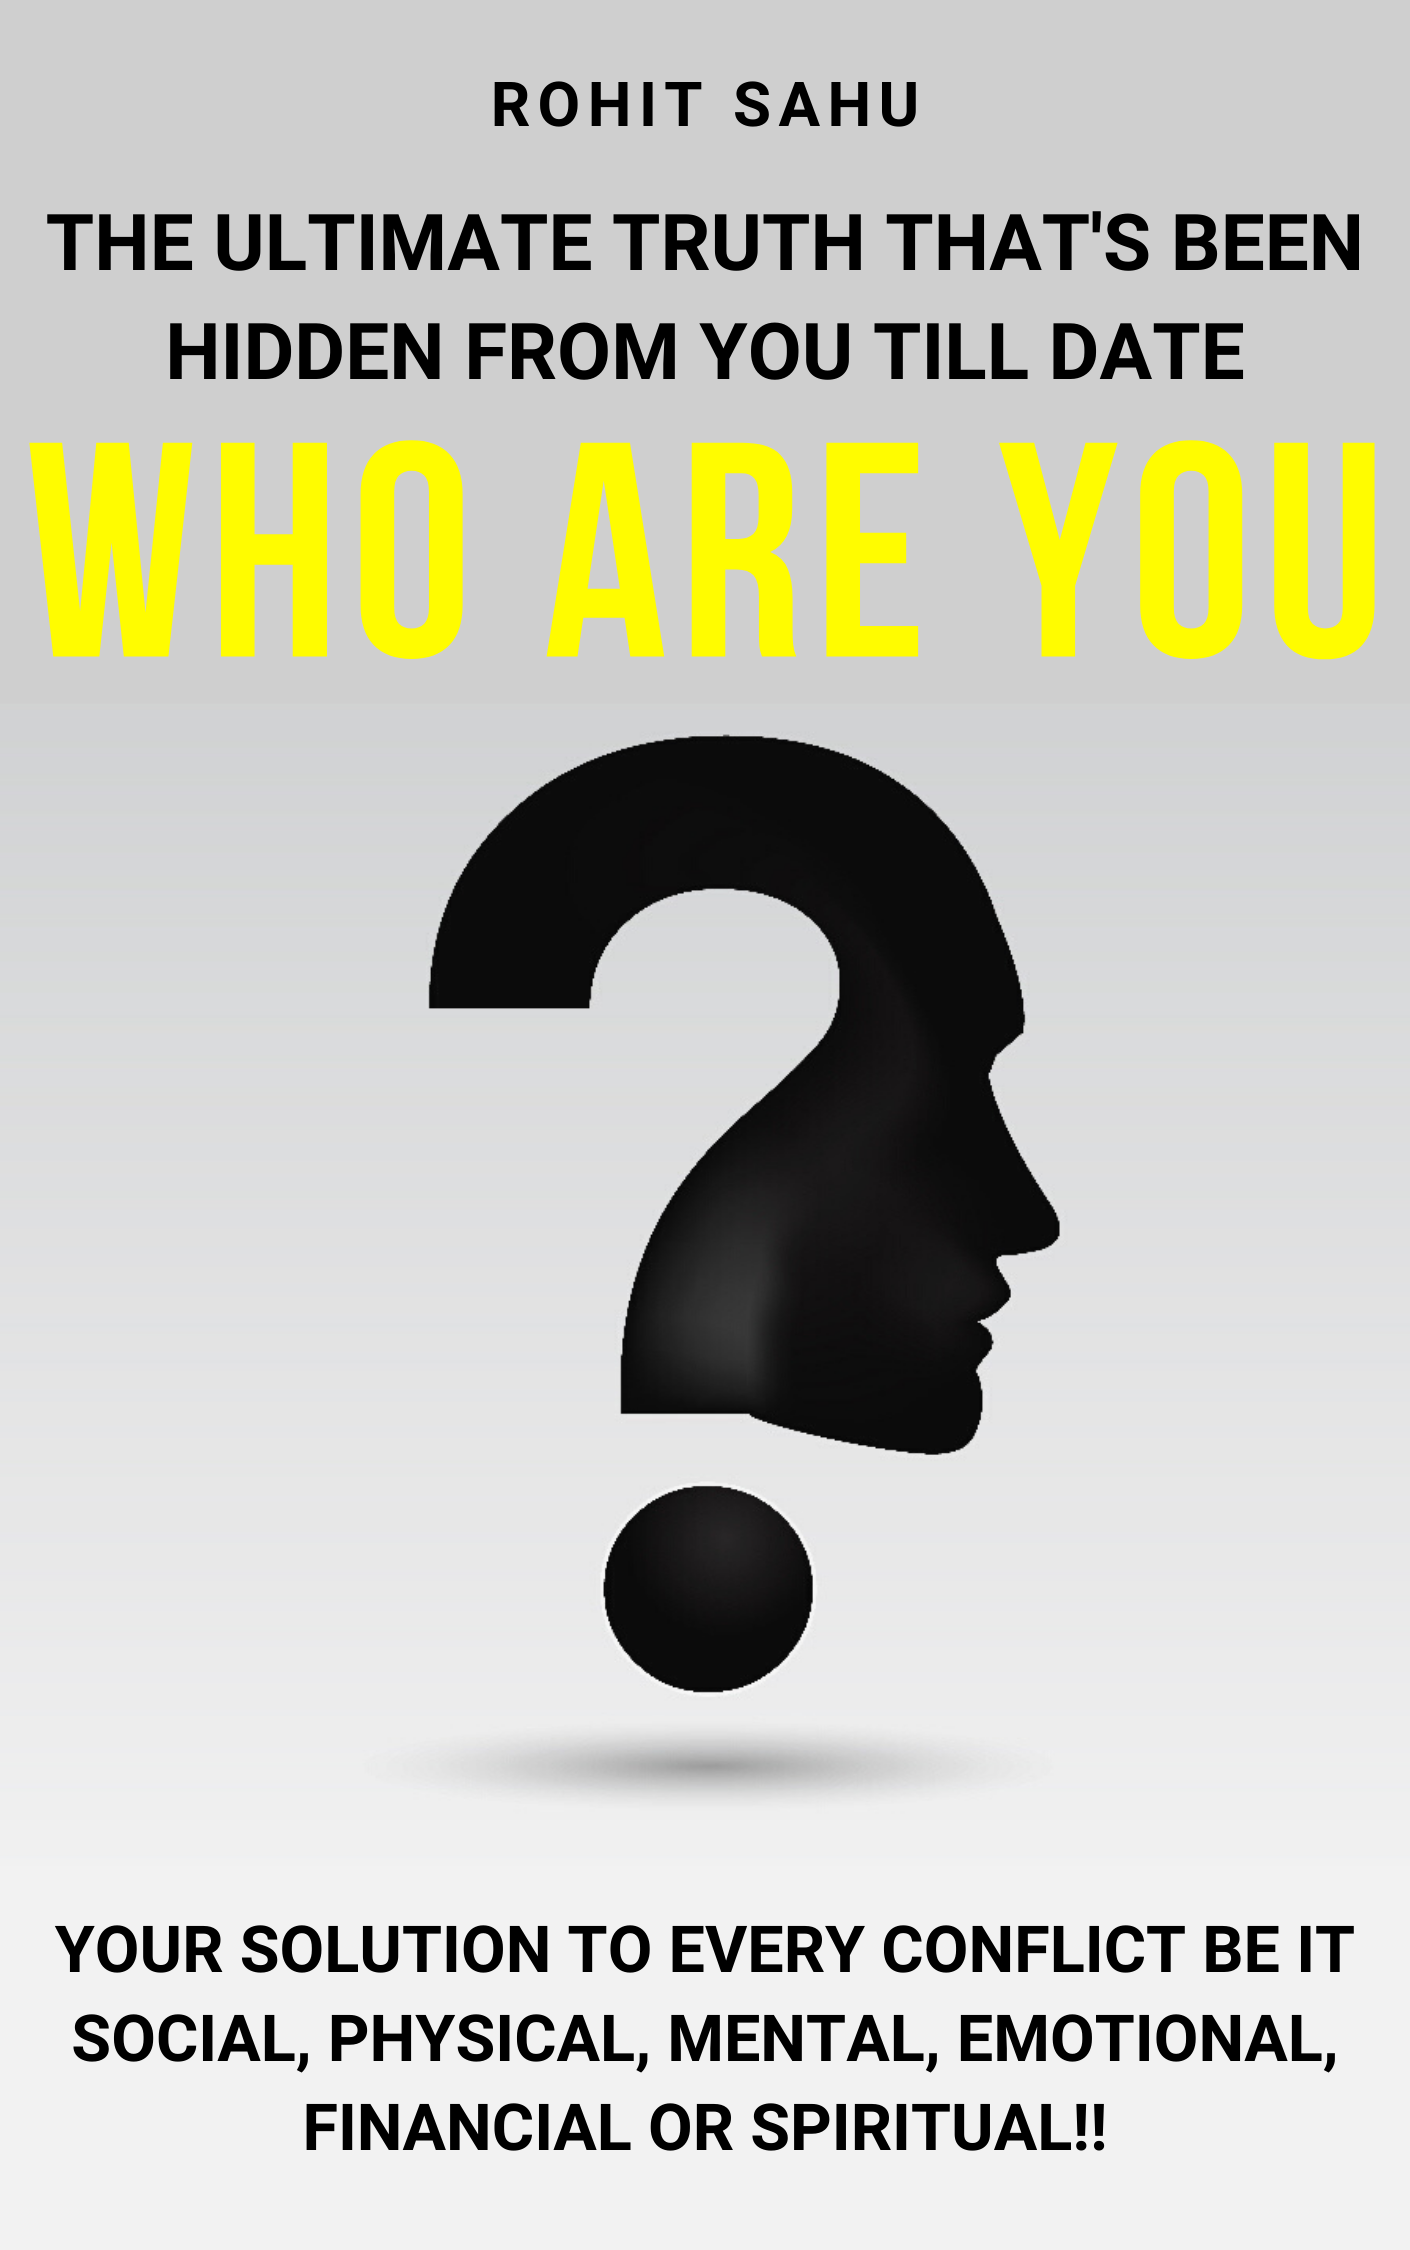 FREE: Who Are You: The Ultimate Truth That’s Been Hidden From You Till Date by Rohit Sahu